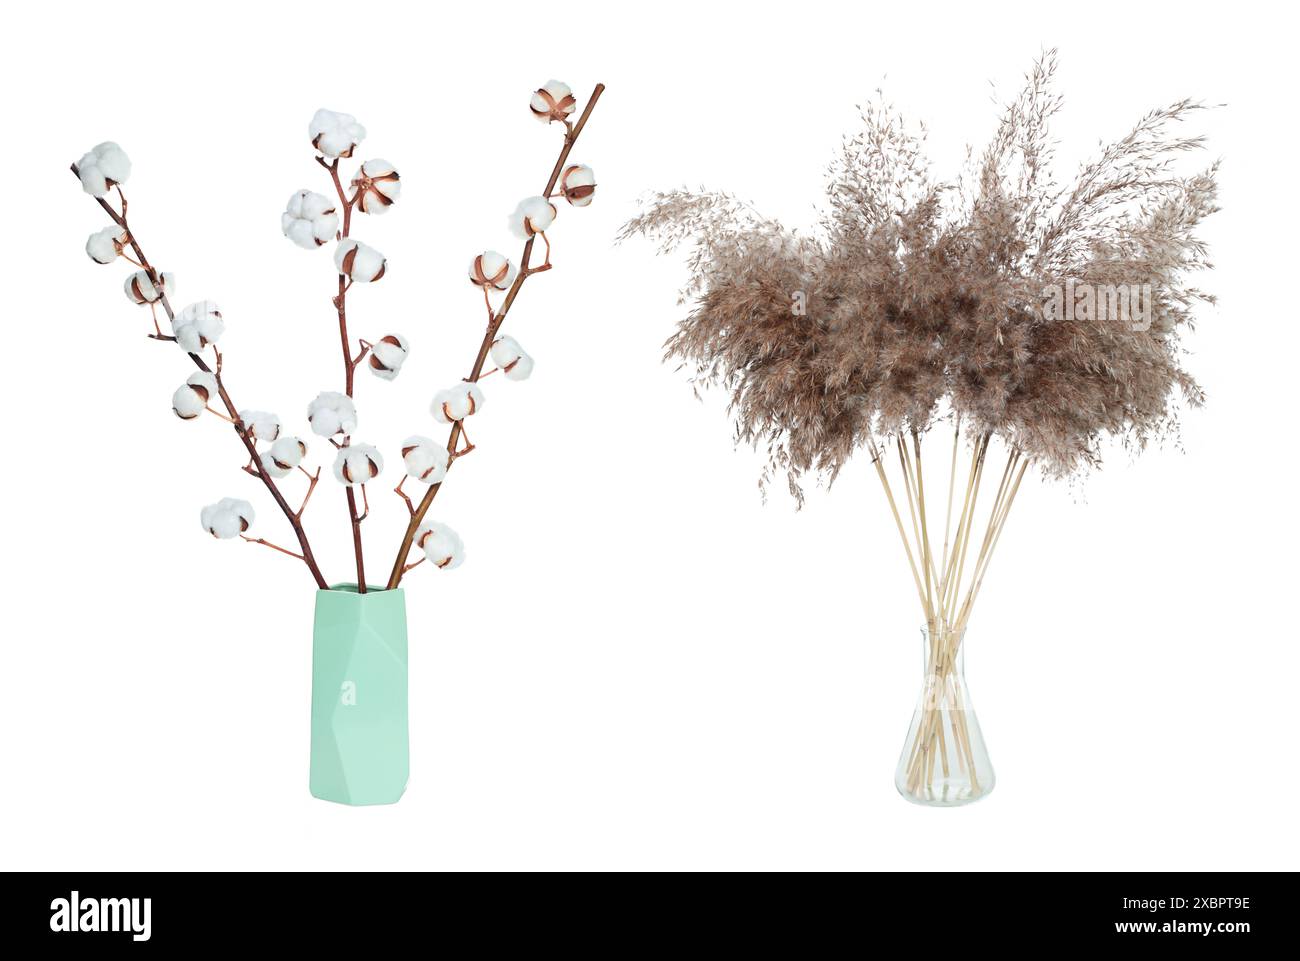 Set of Dry decorative Cotton Flower and Pampas Grass in a glass vase, isolated on a transparent background Stock Photo